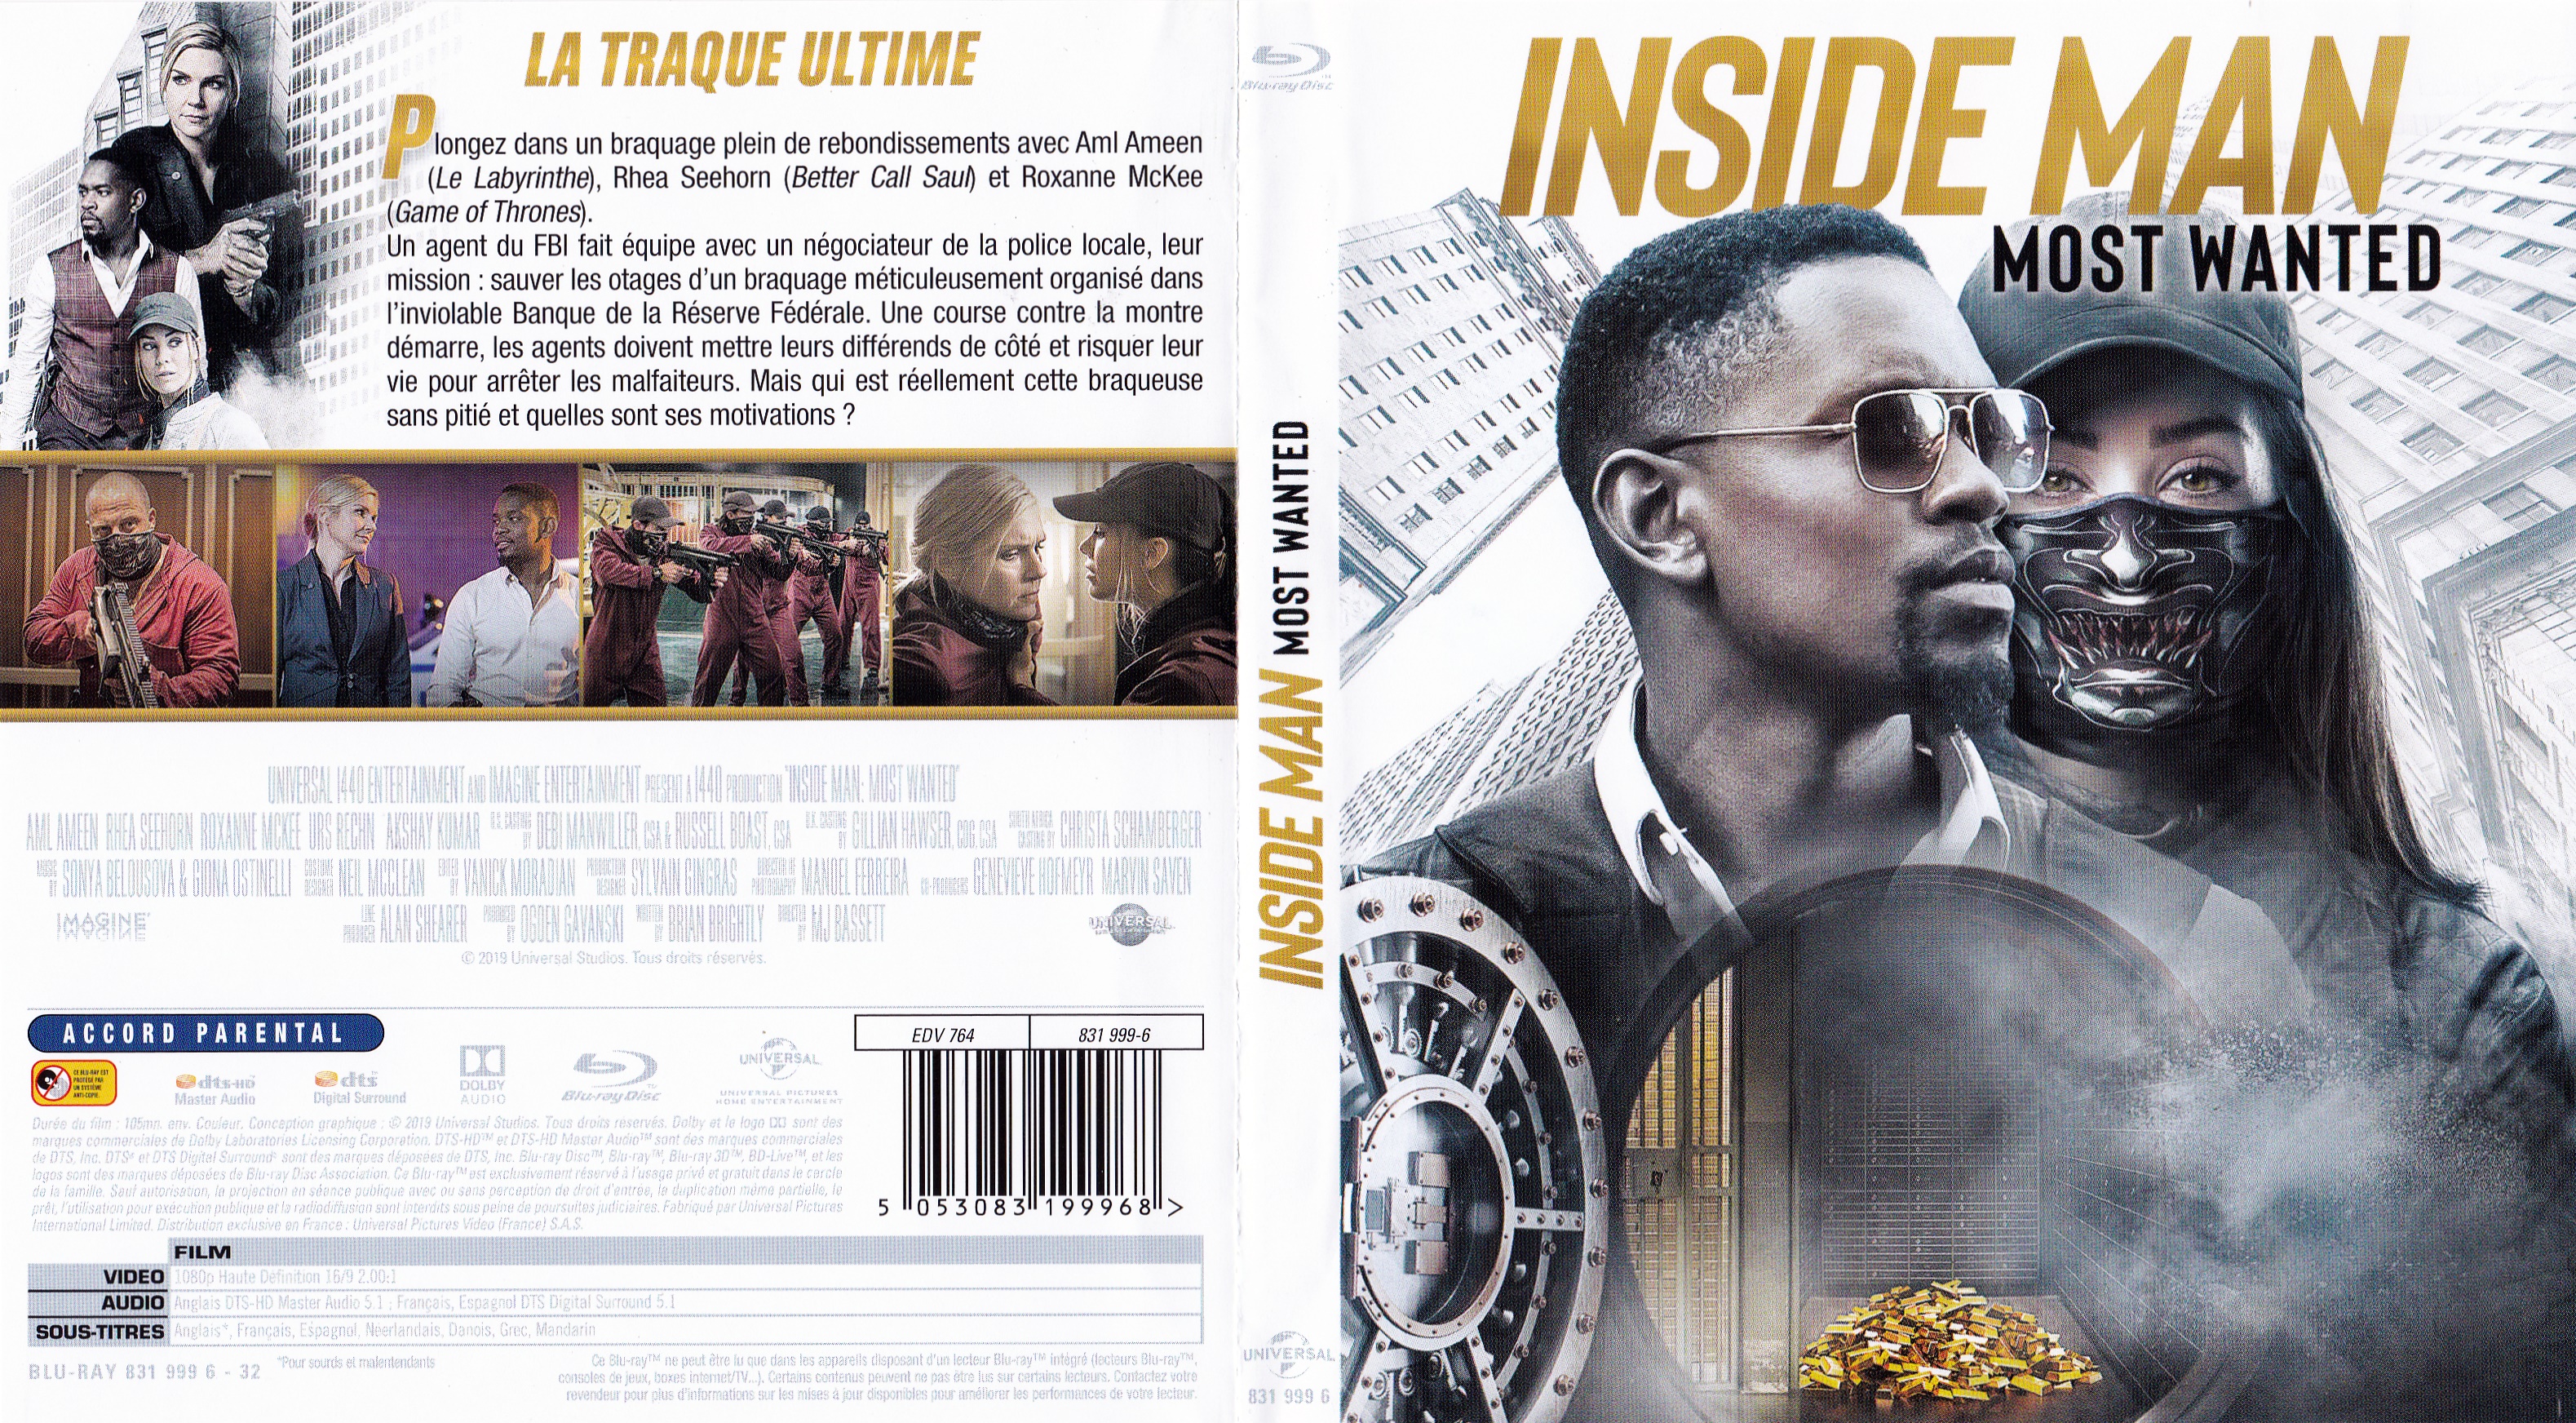 Jaquette DVD Inside man most wanted (BLU-RAY)